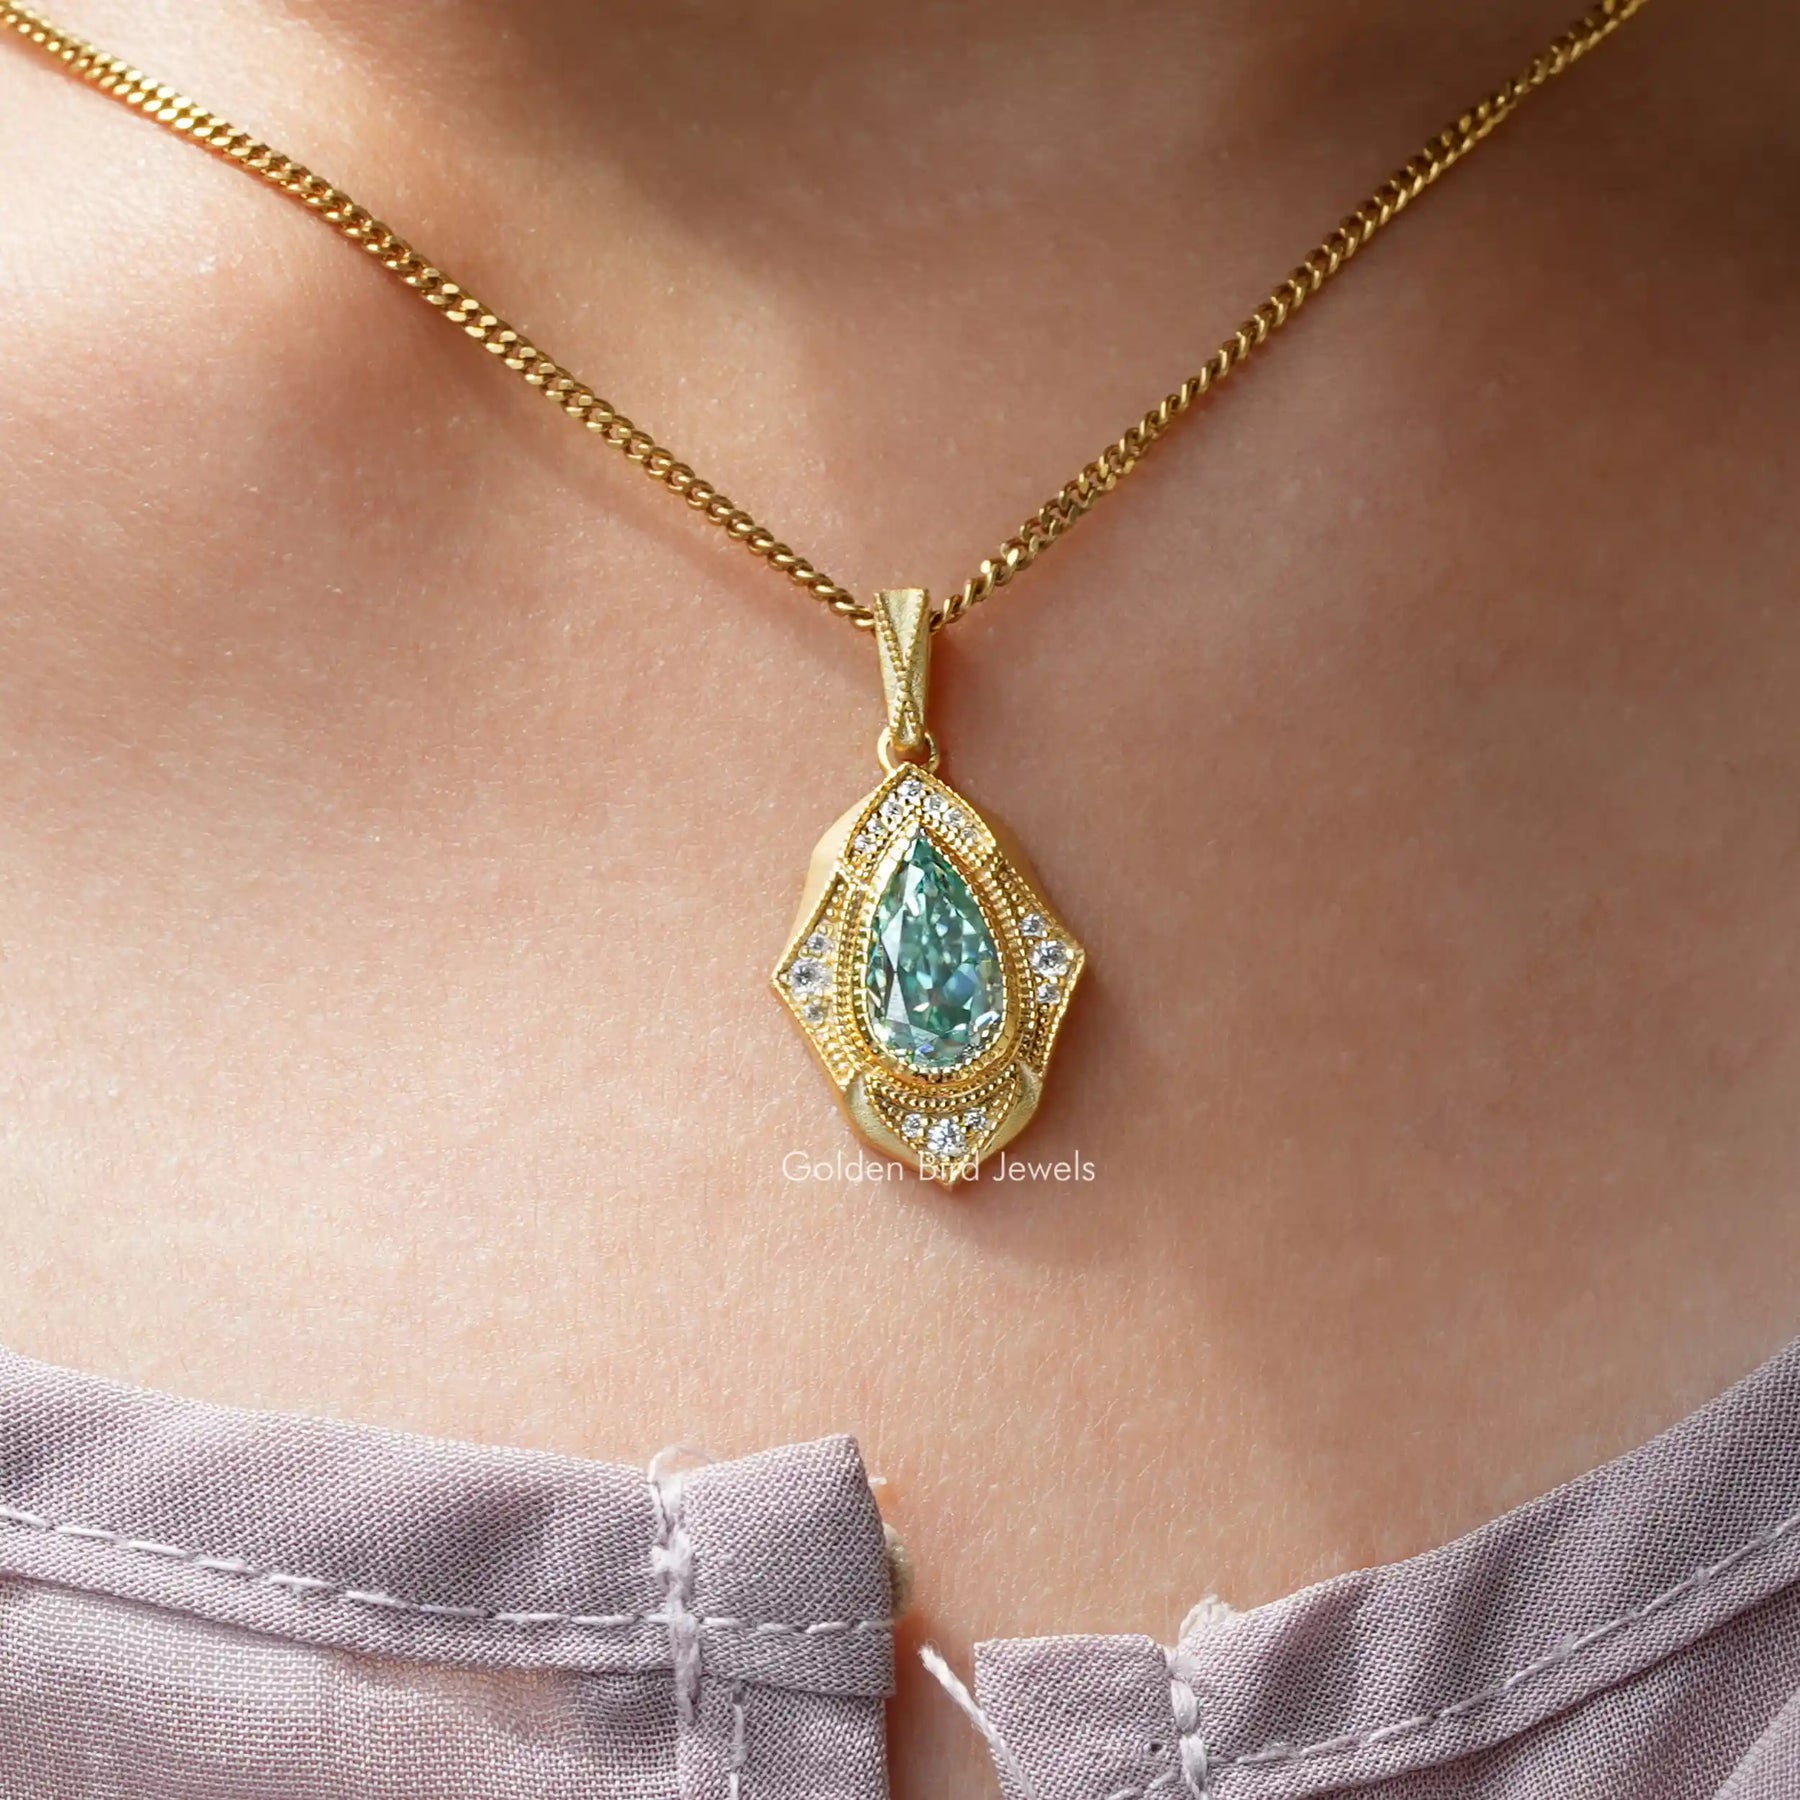 [In neck front view of blue pear cut moissanite pendant made of vs clarity]-[Golden Bird Jewels]